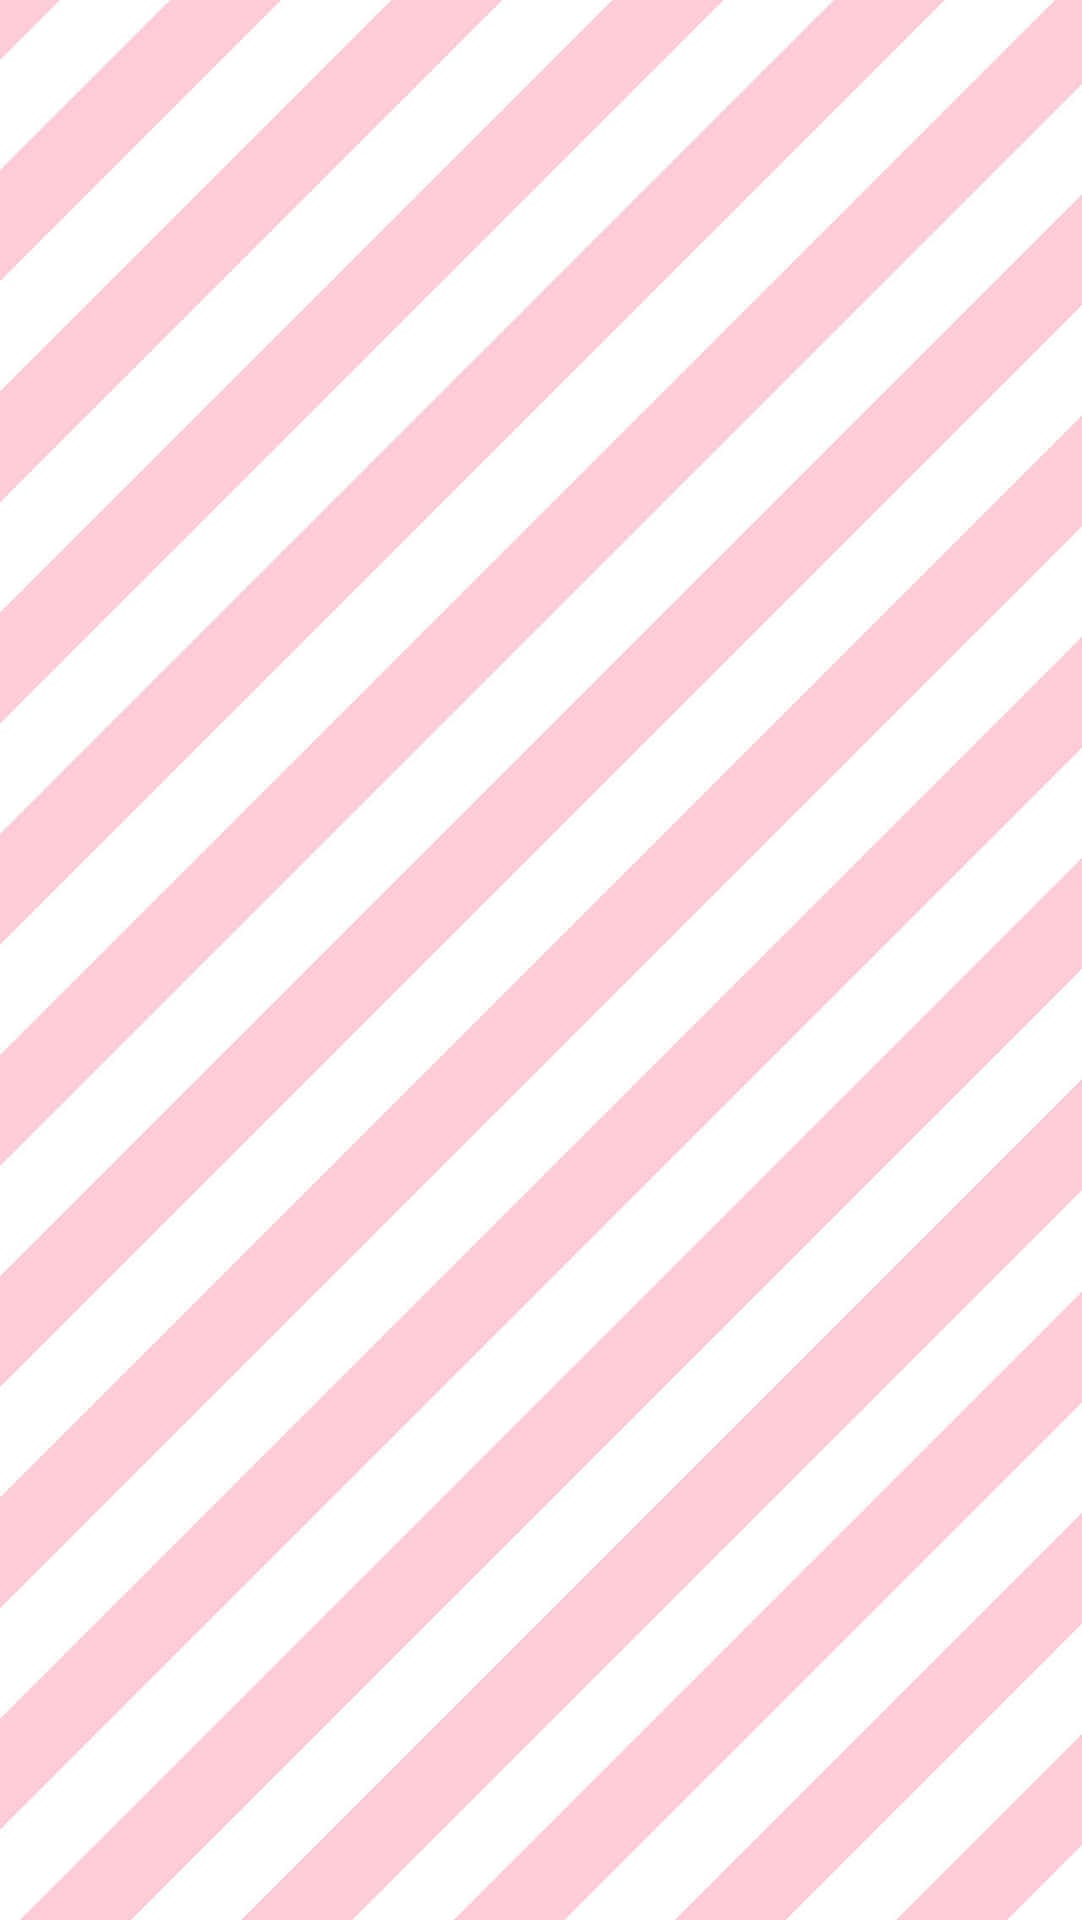 a pink and white striped background